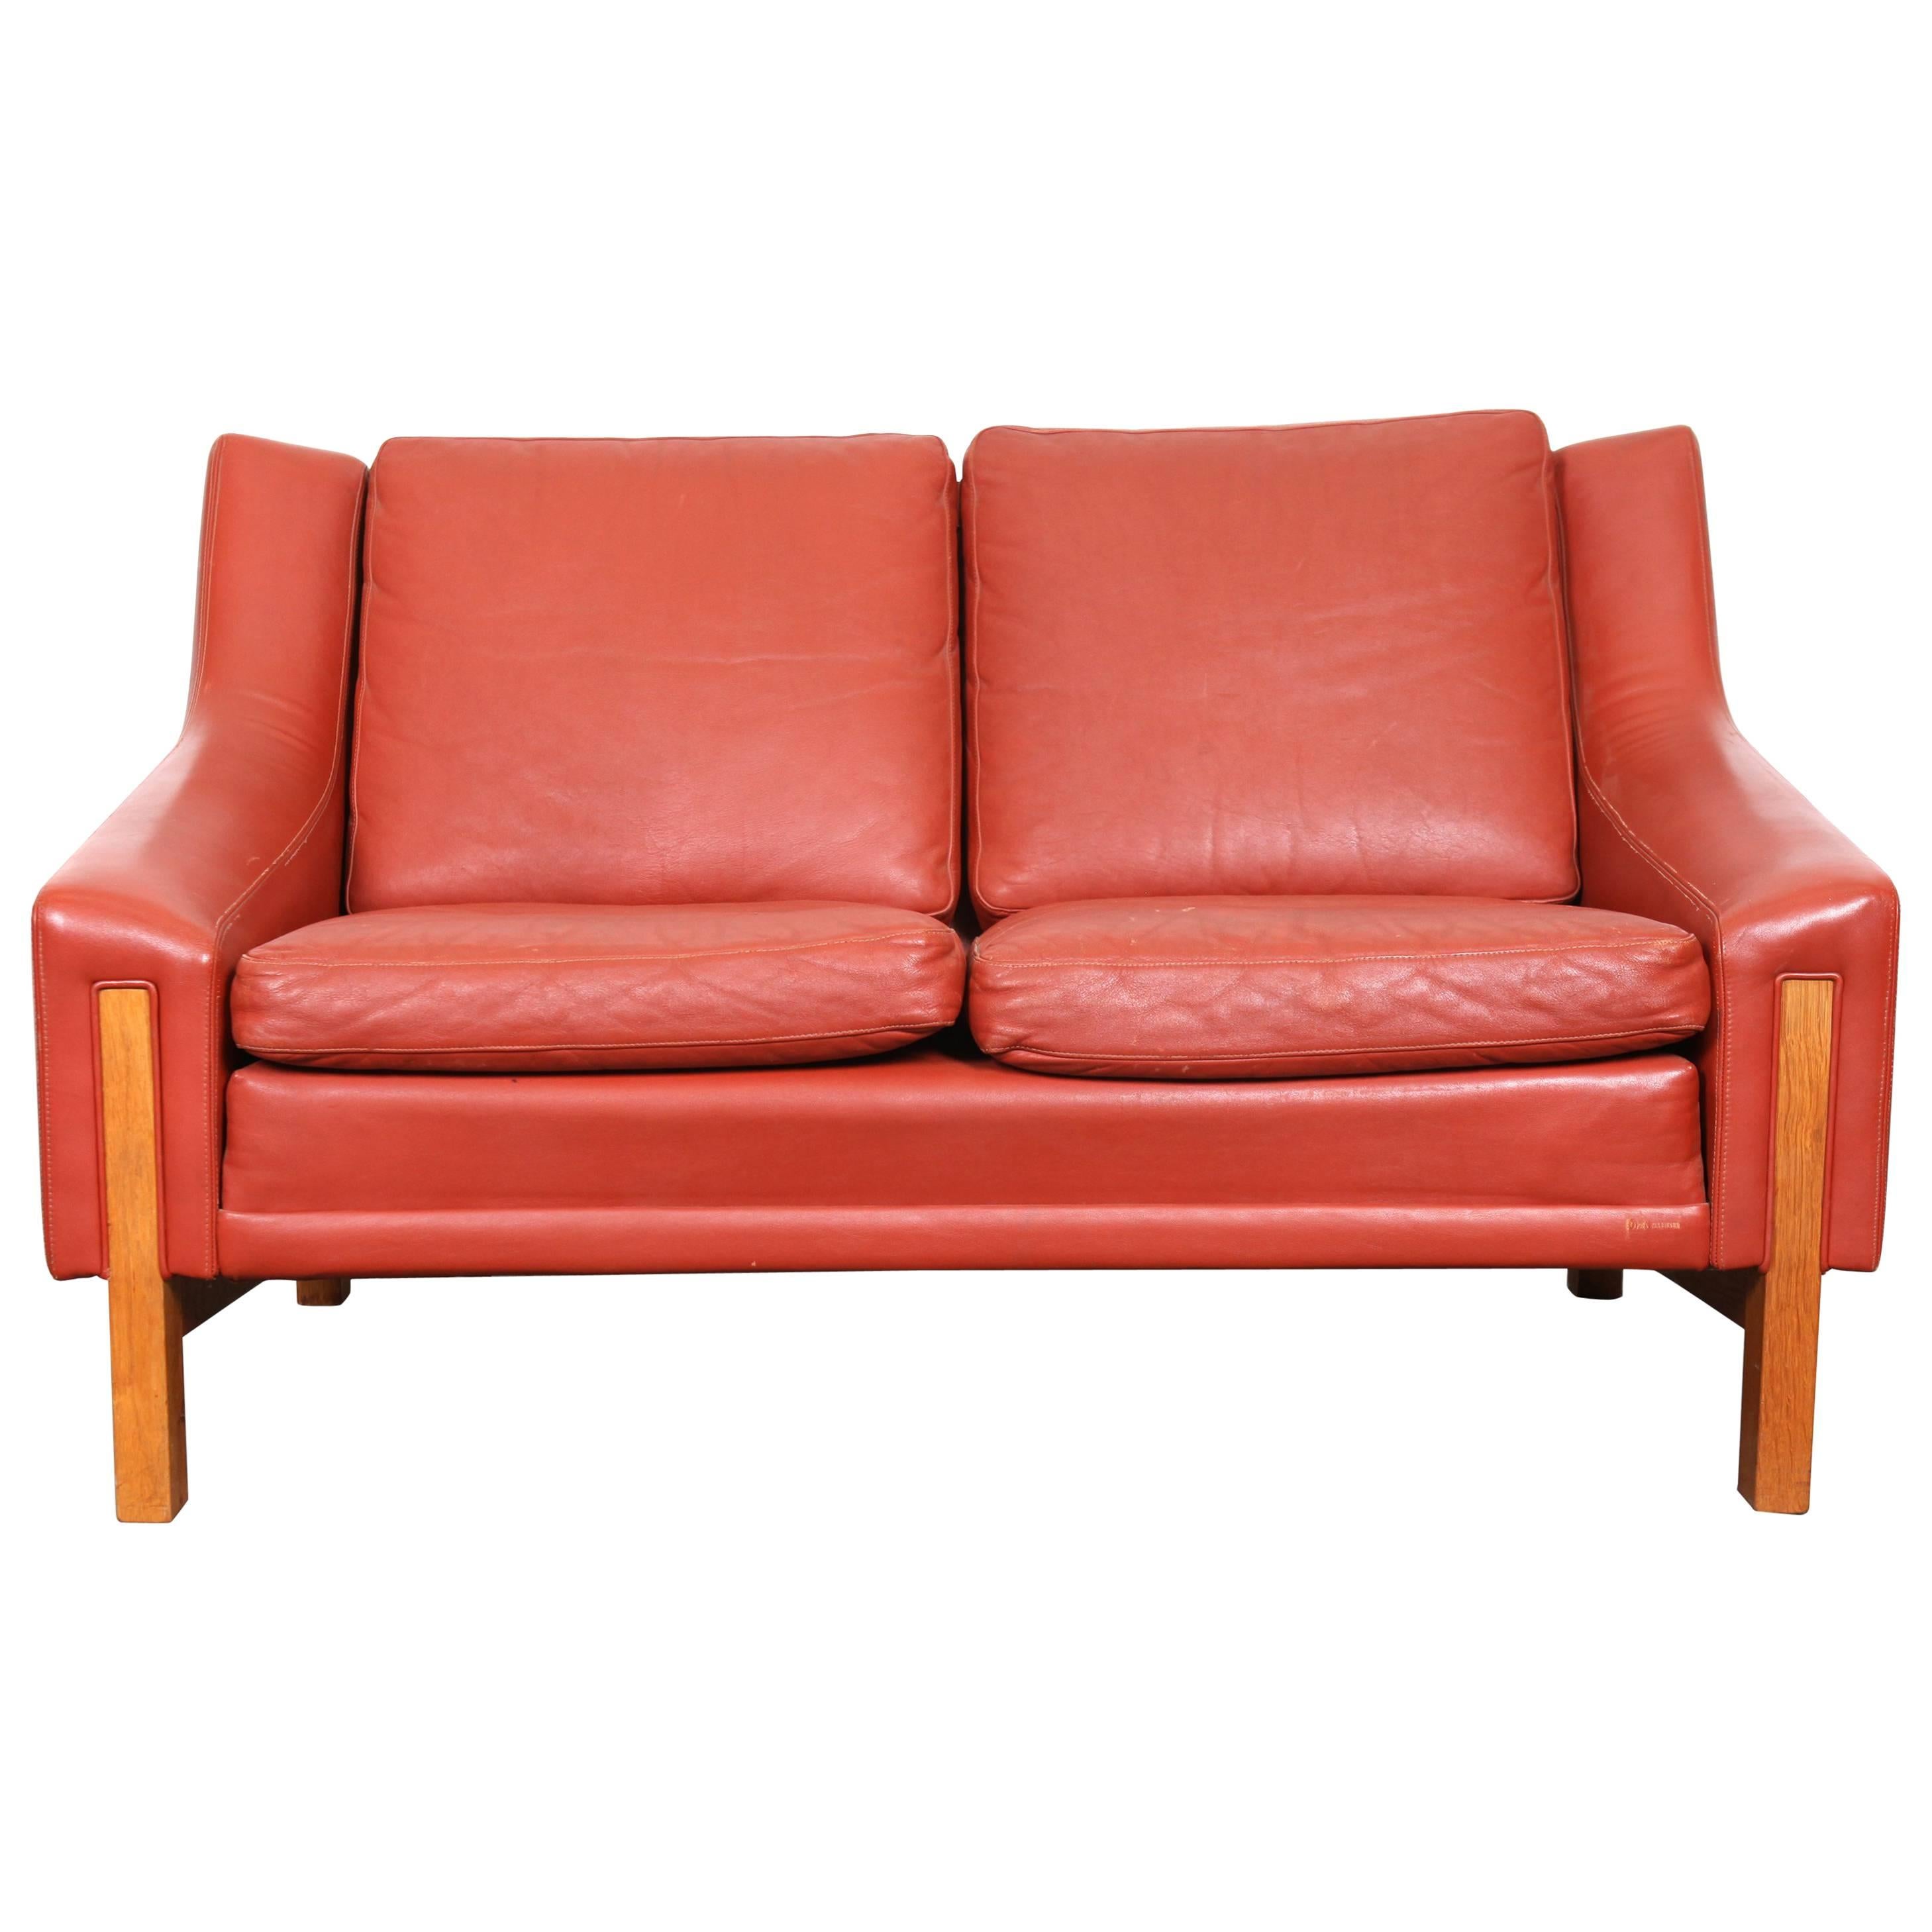 Red leather Mid-Century Modern love seat with wood accent legs.